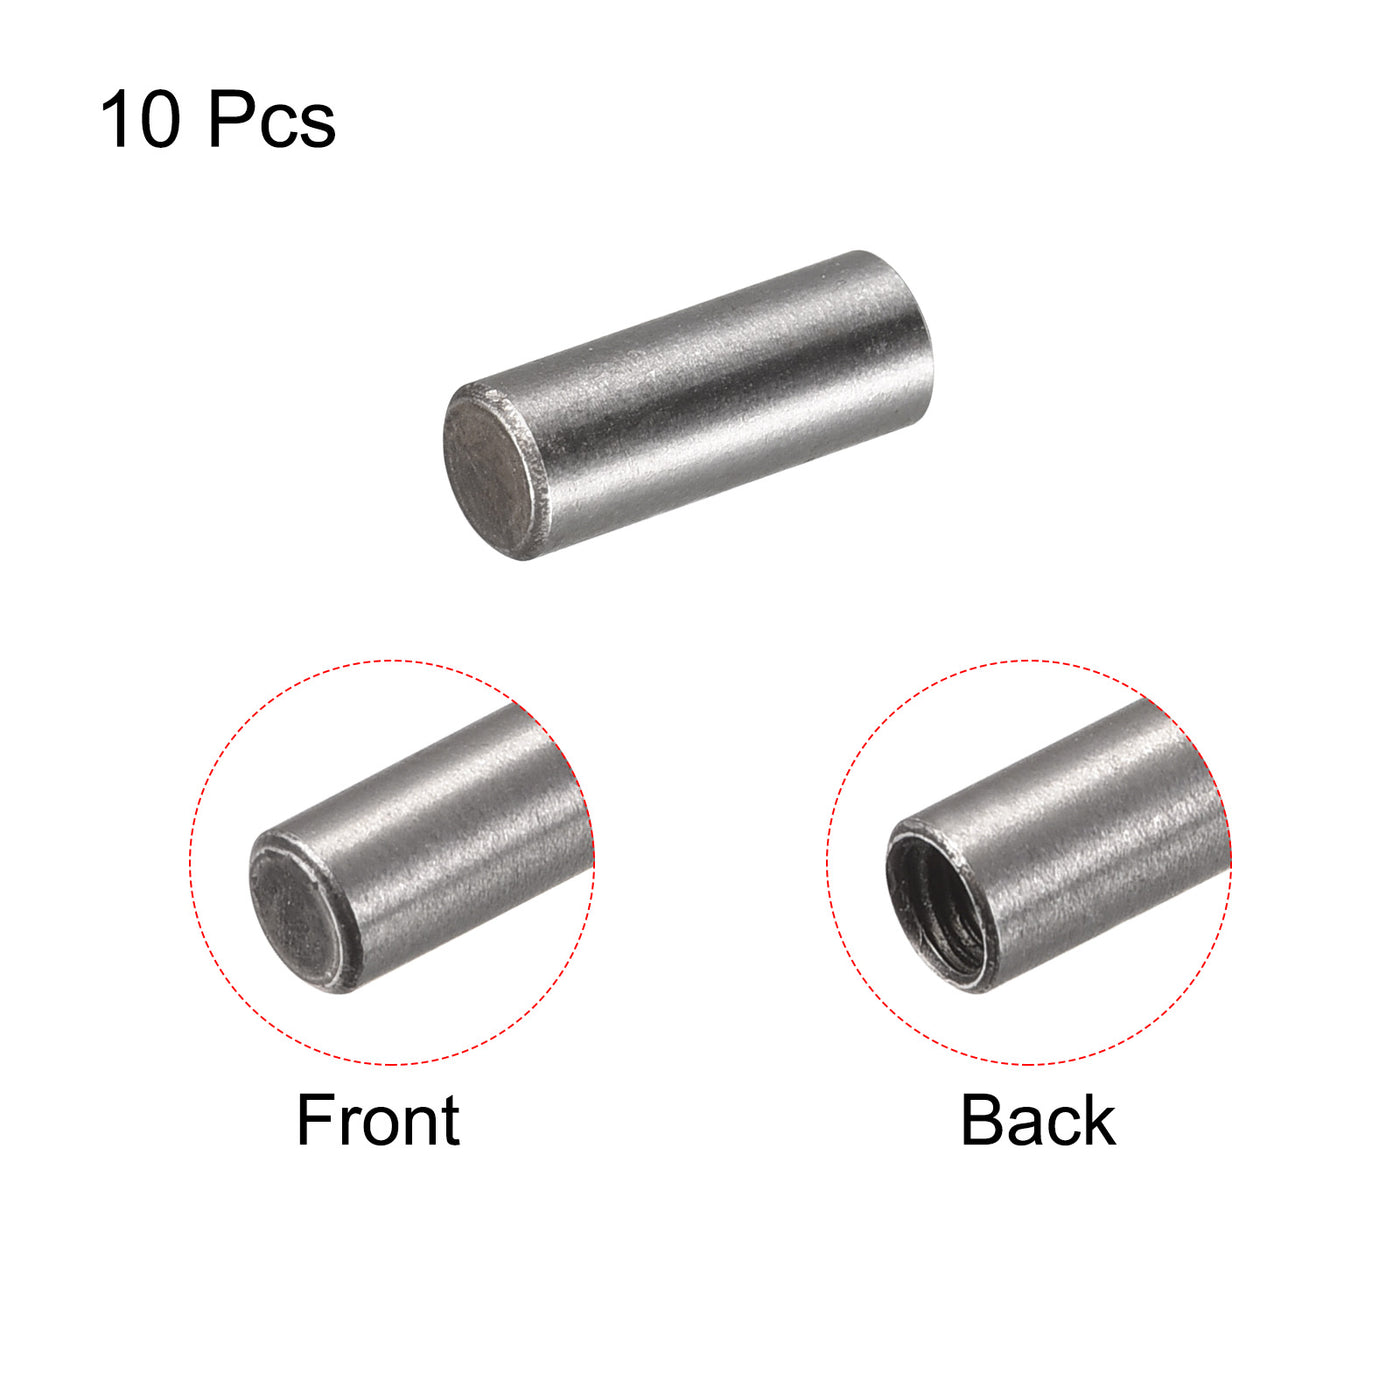 uxcell Uxcell Carbon Steel Dowel Pin 4 x 10mm M3 Female Thread Cylindrical Shelf Support Pin 10Pcs